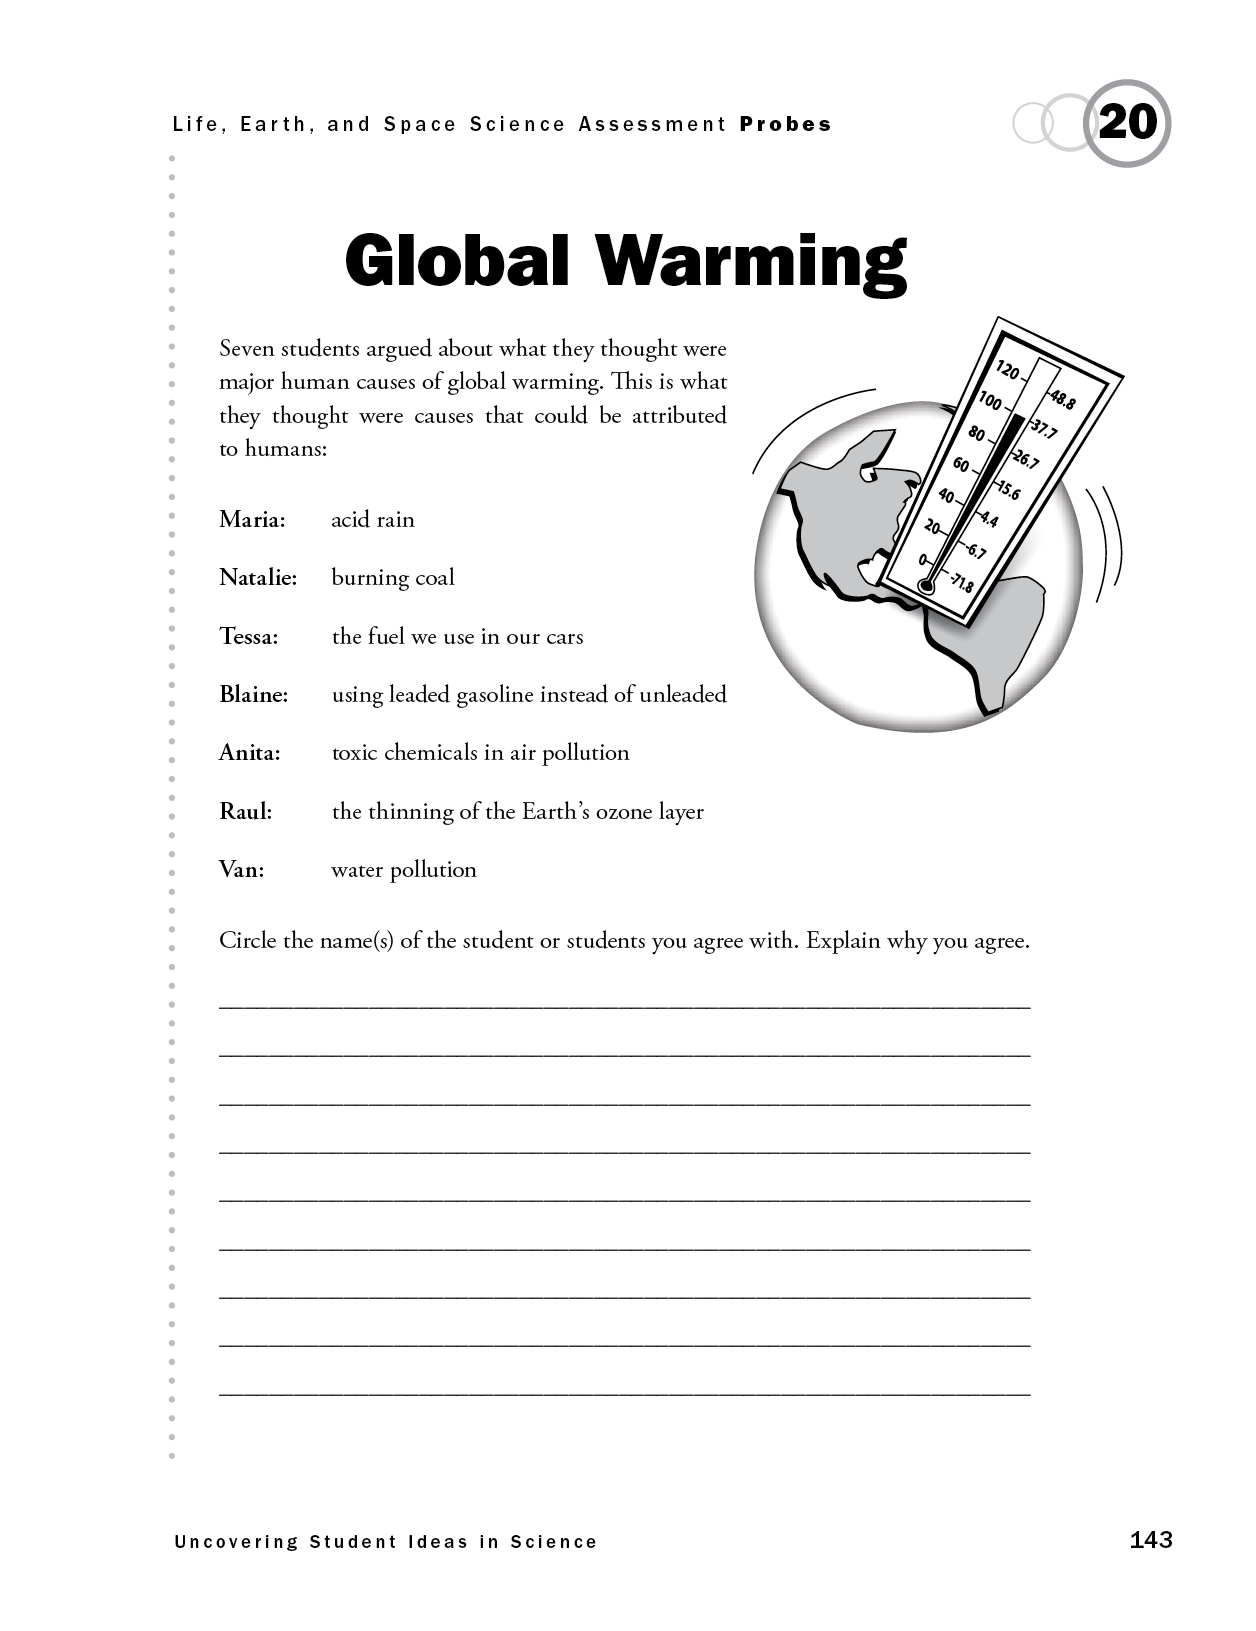 research questions for global warming